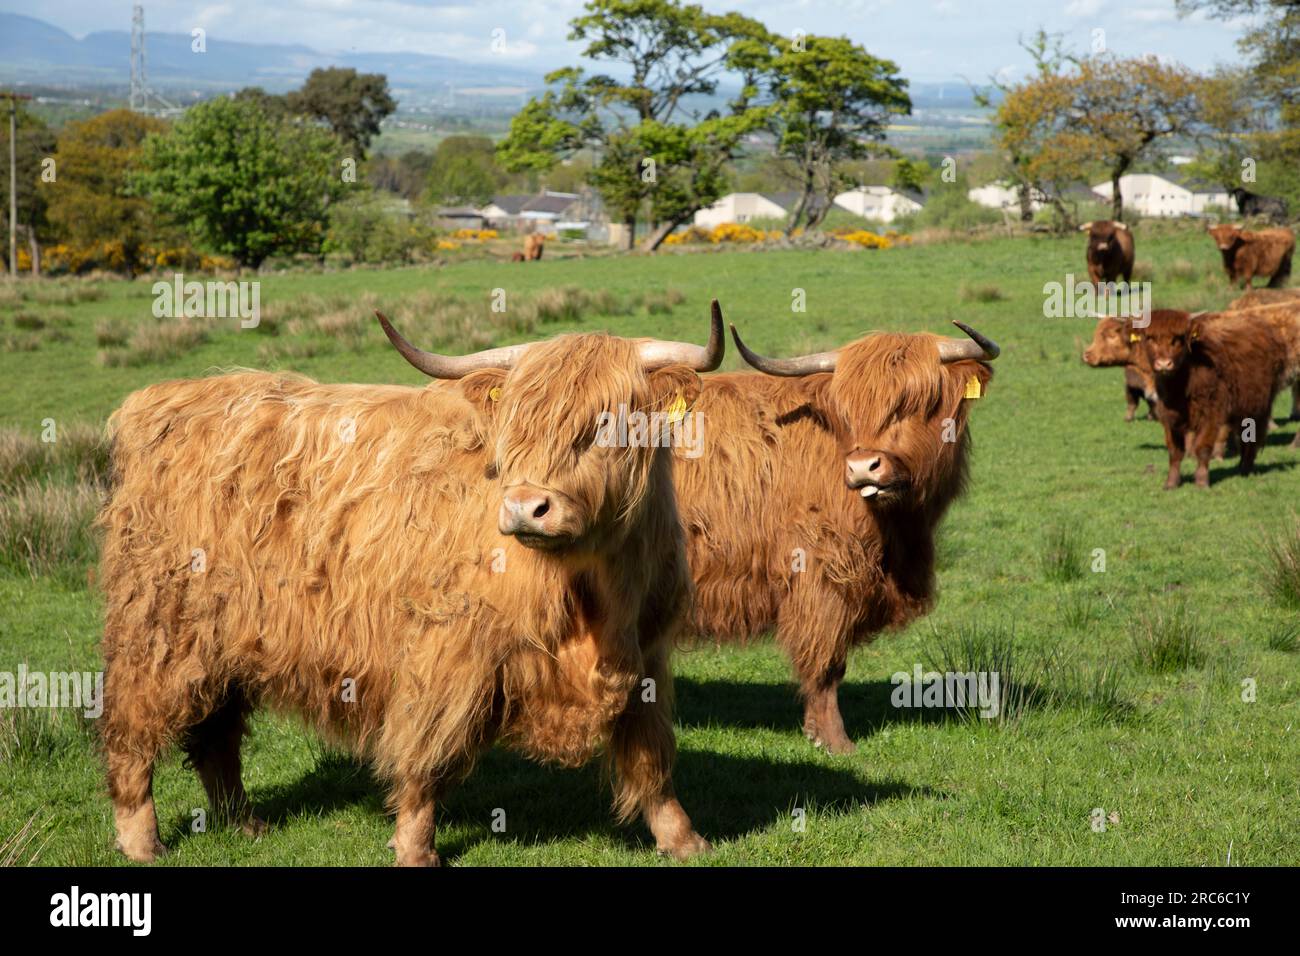 Two highland cattle stood together in a field Stock Photo